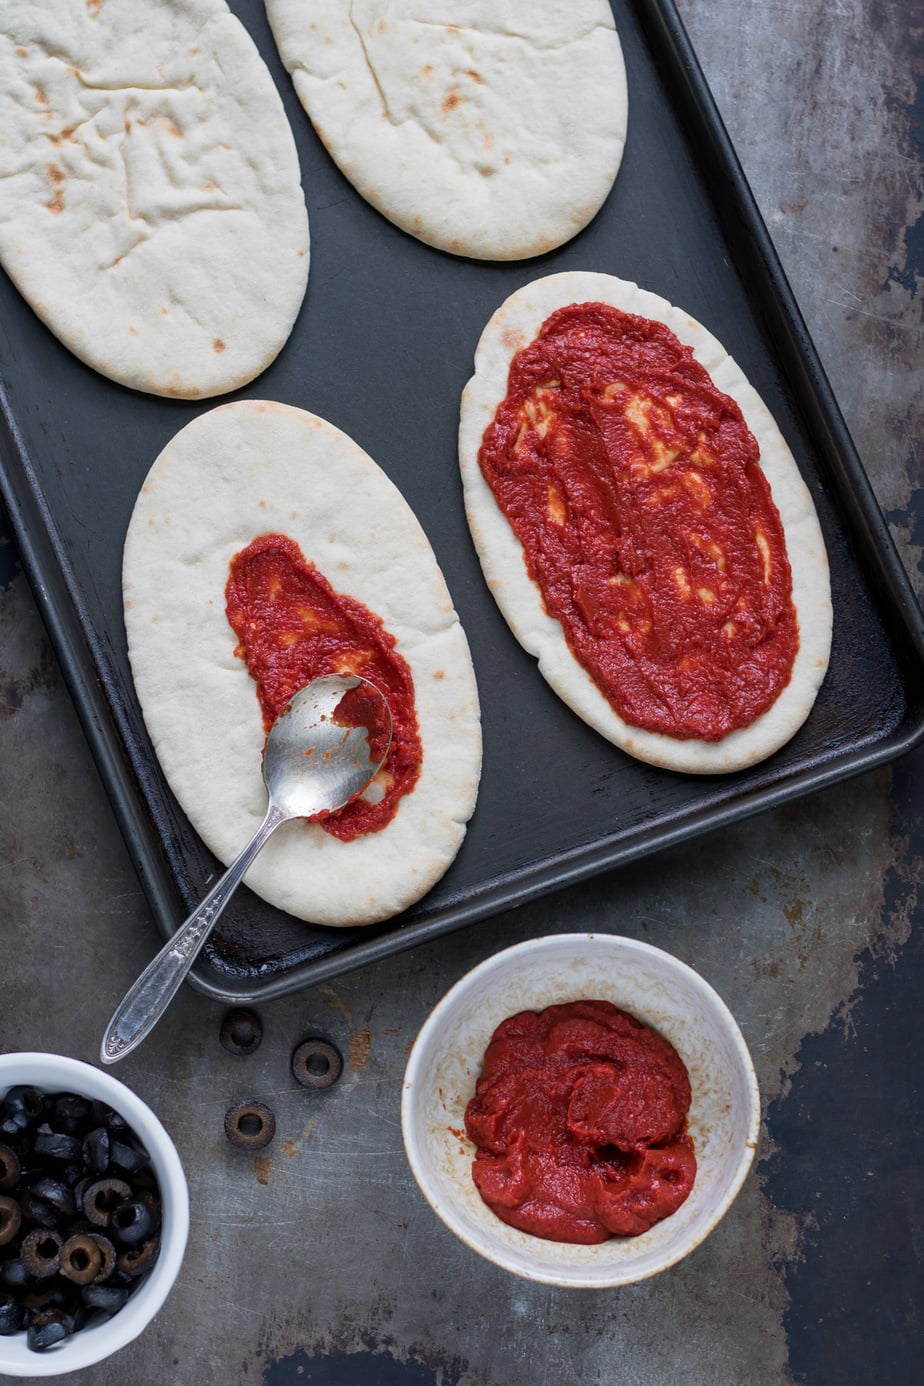 Pita breads on a baking sheet being spread with pizza sauce.